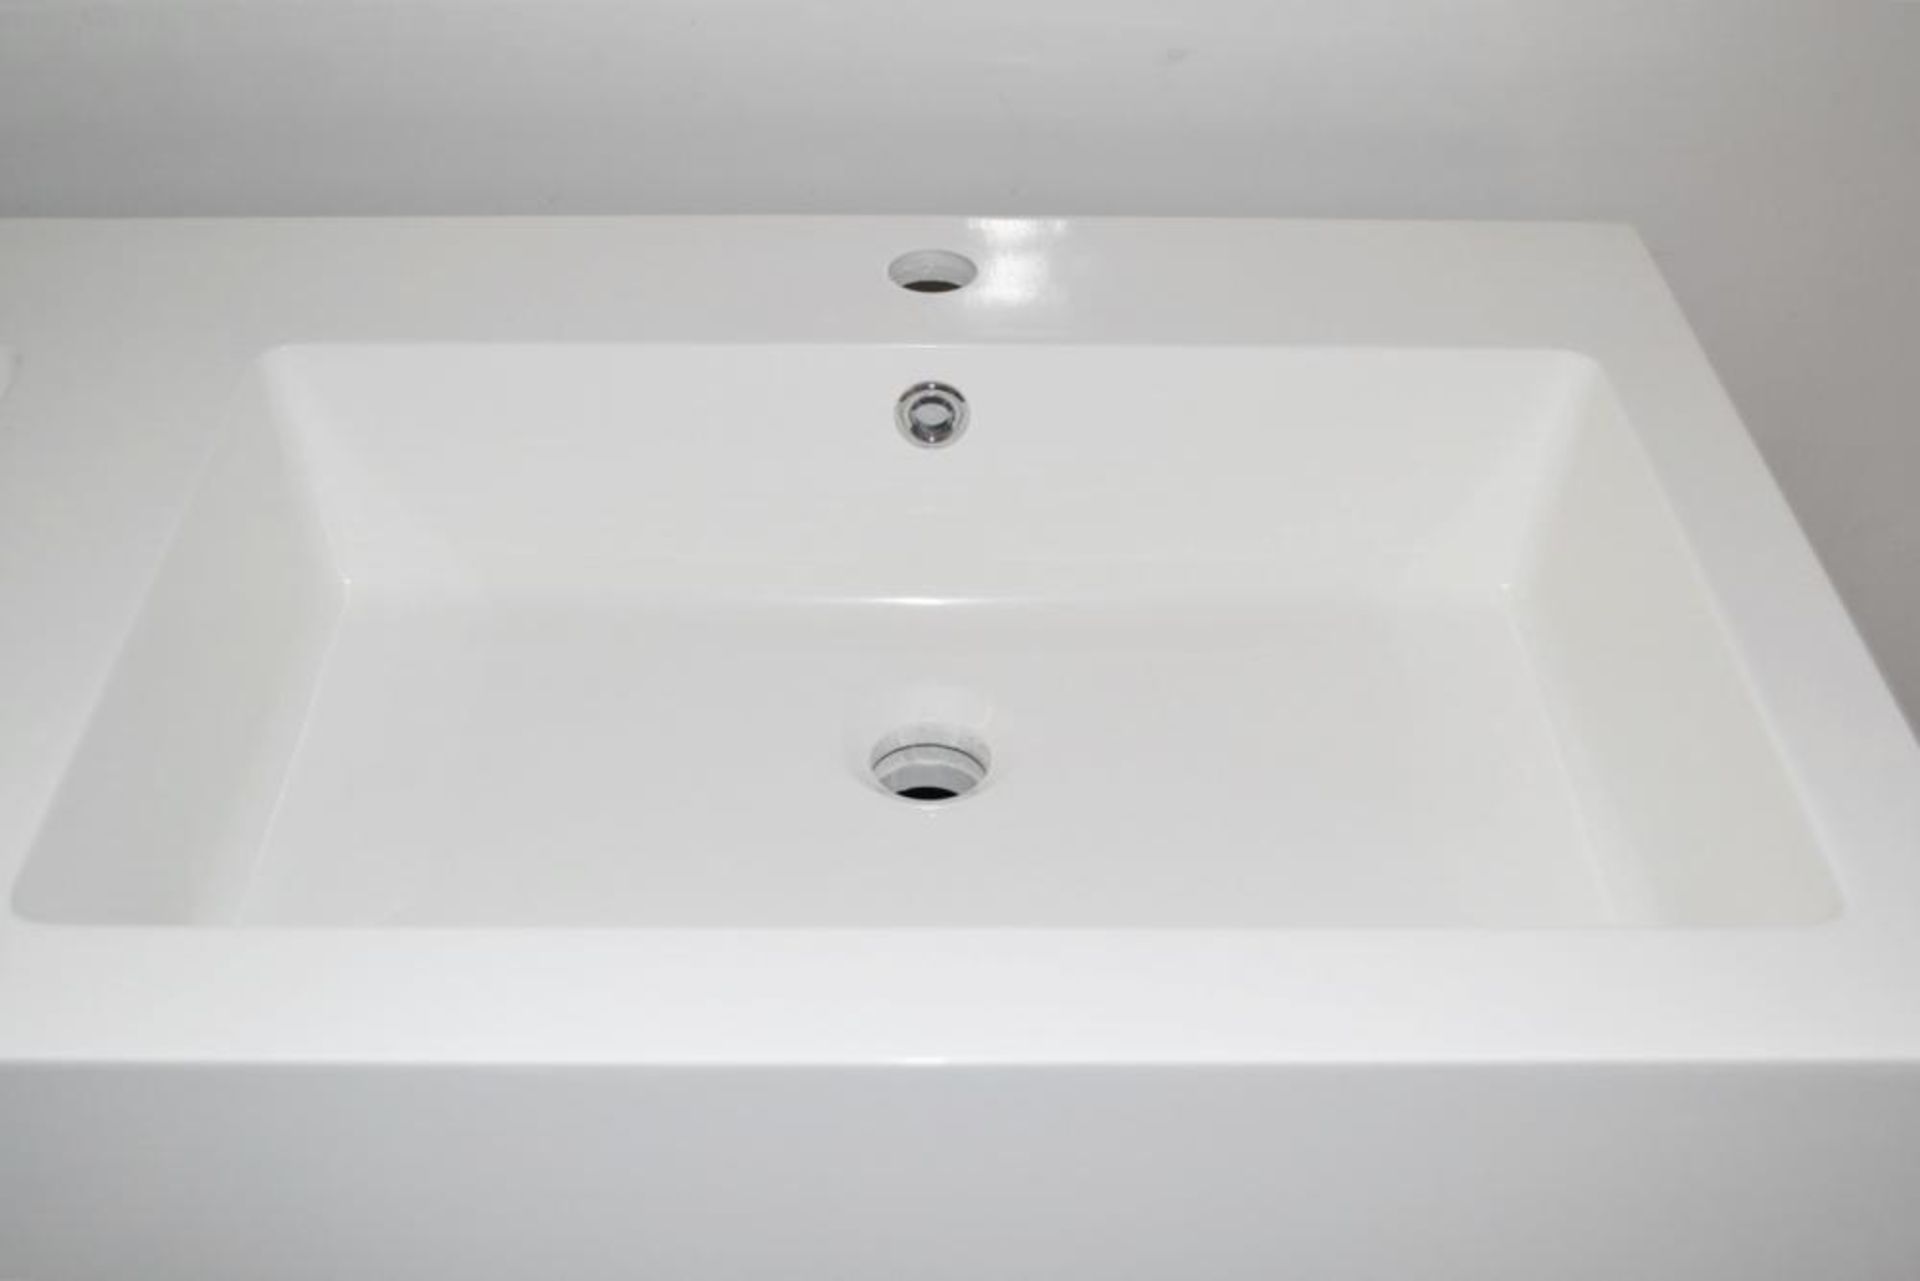 JOB LOT of 10 x Gloss White 1200mm 4-Door Double Basin Freestanding Bathroom Cabinet - New & Boxed - Image 2 of 7